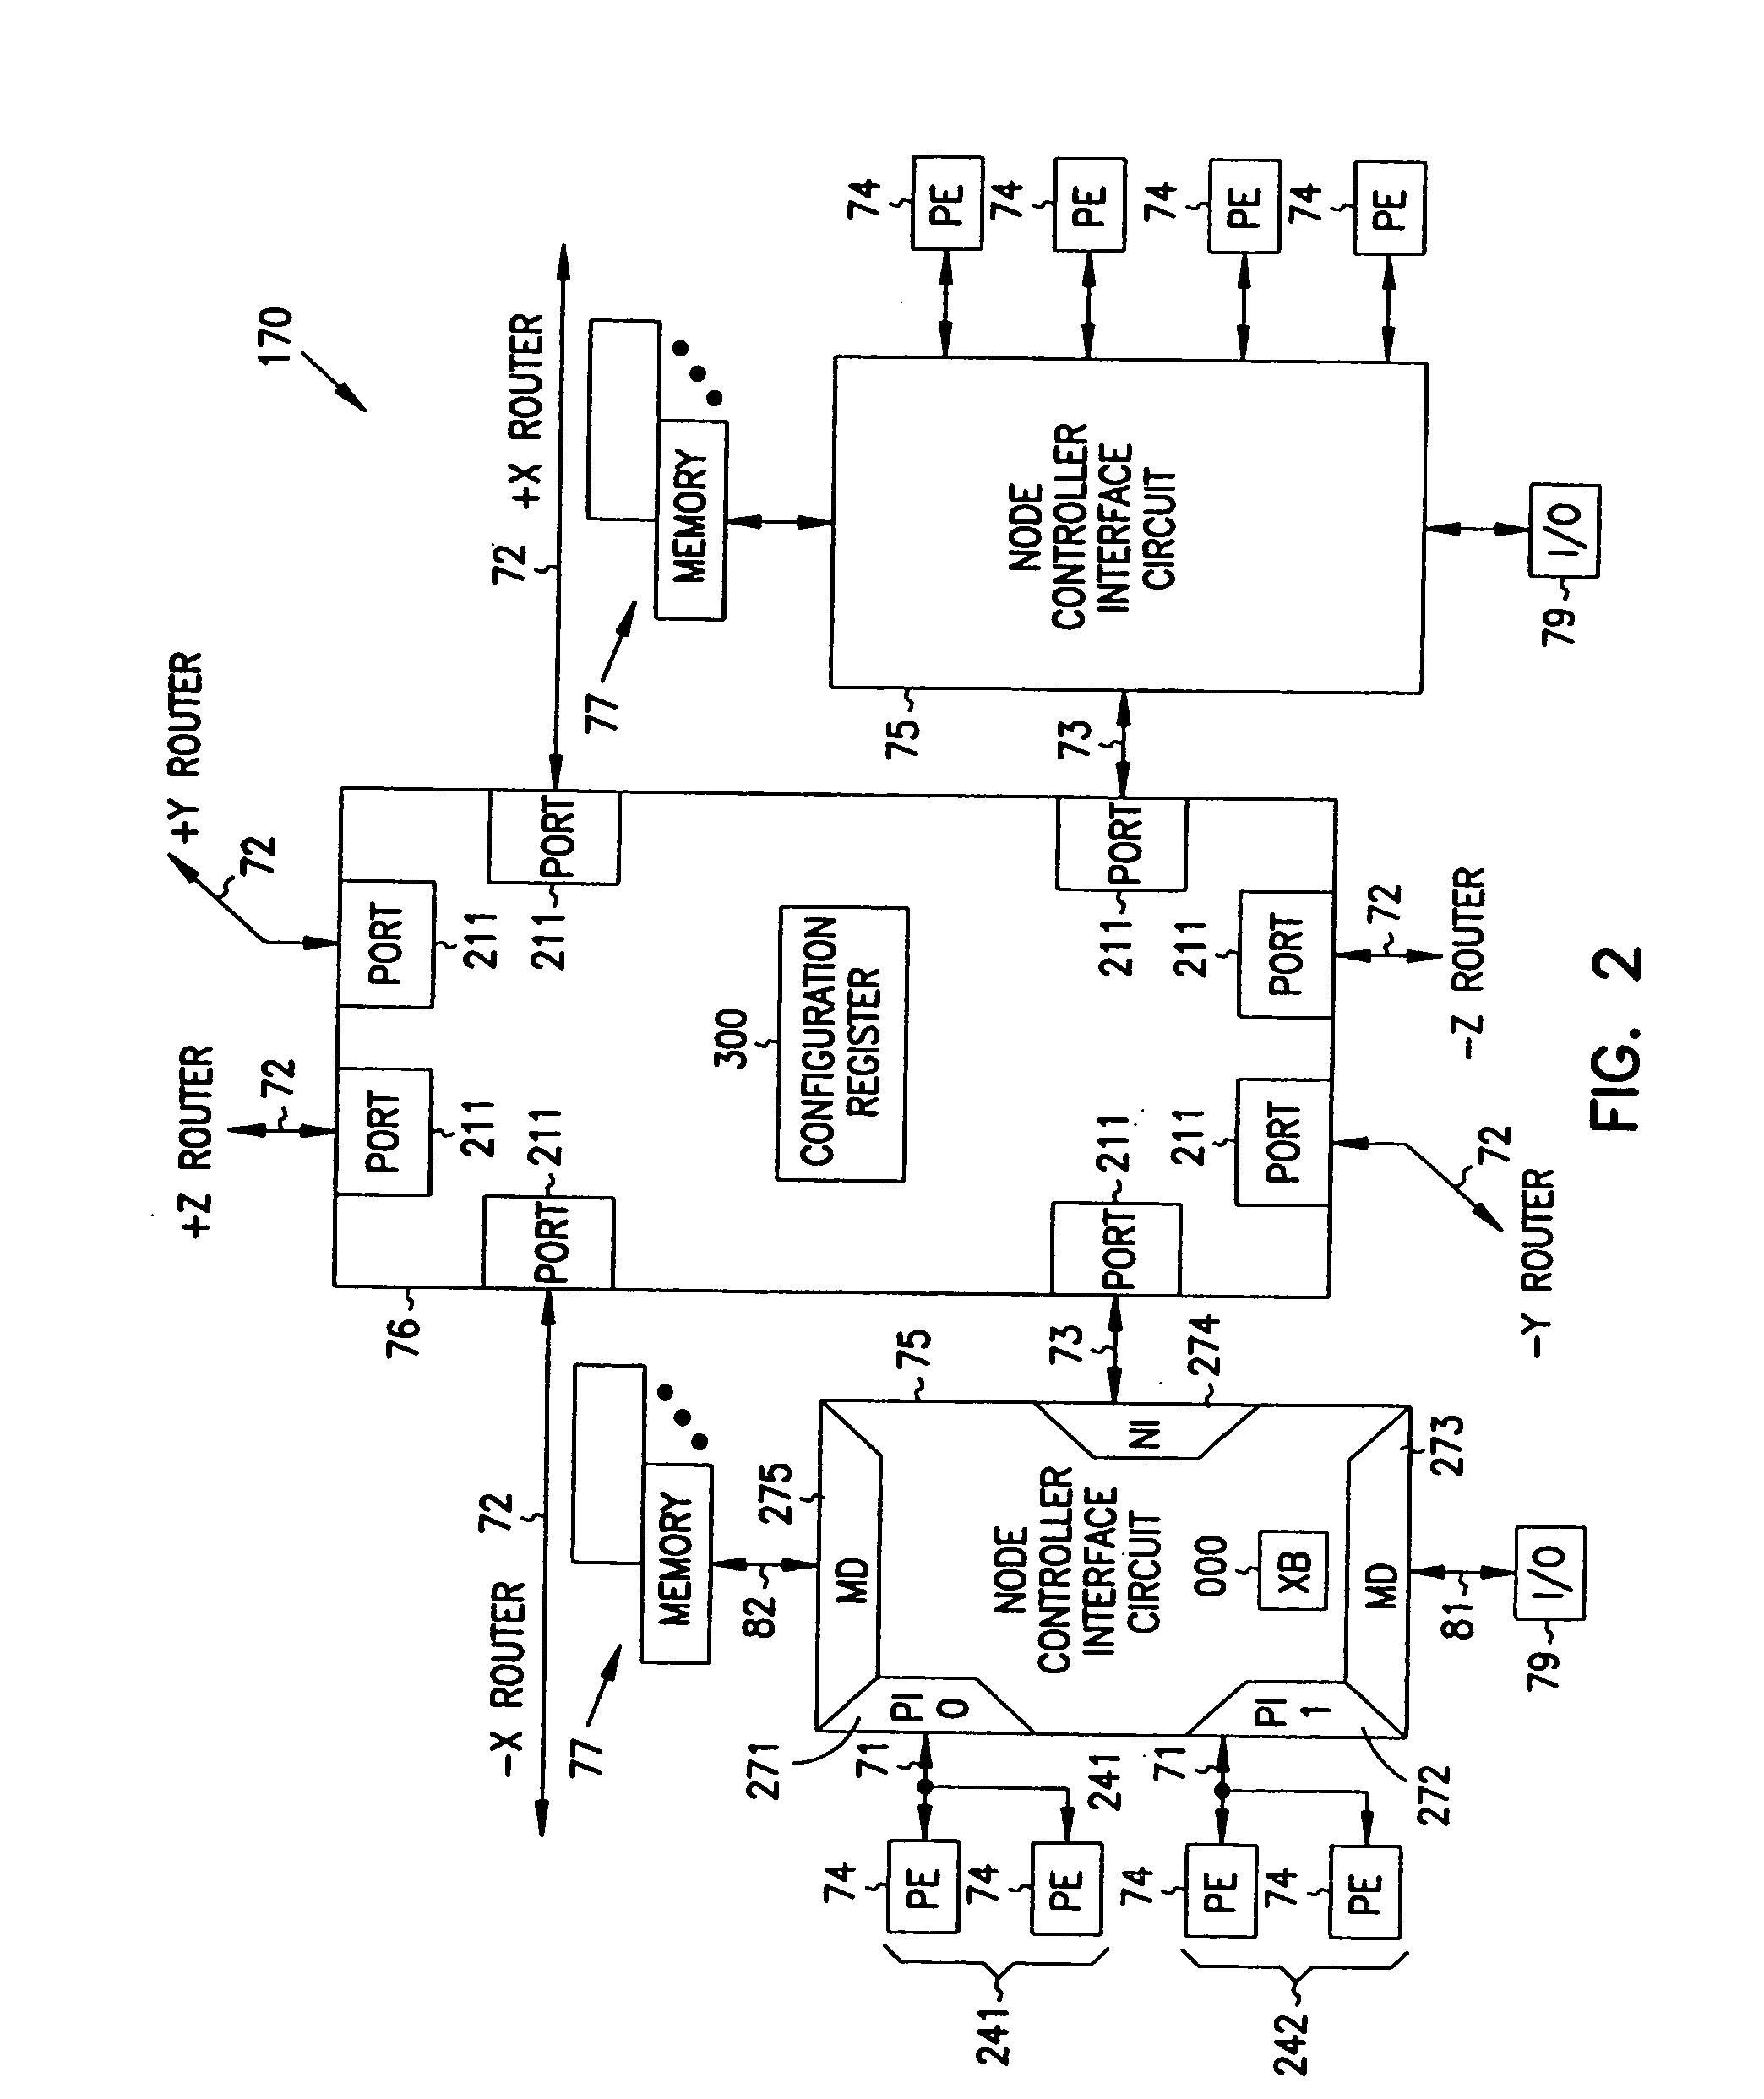 Multiprocessor node controller circuit and method